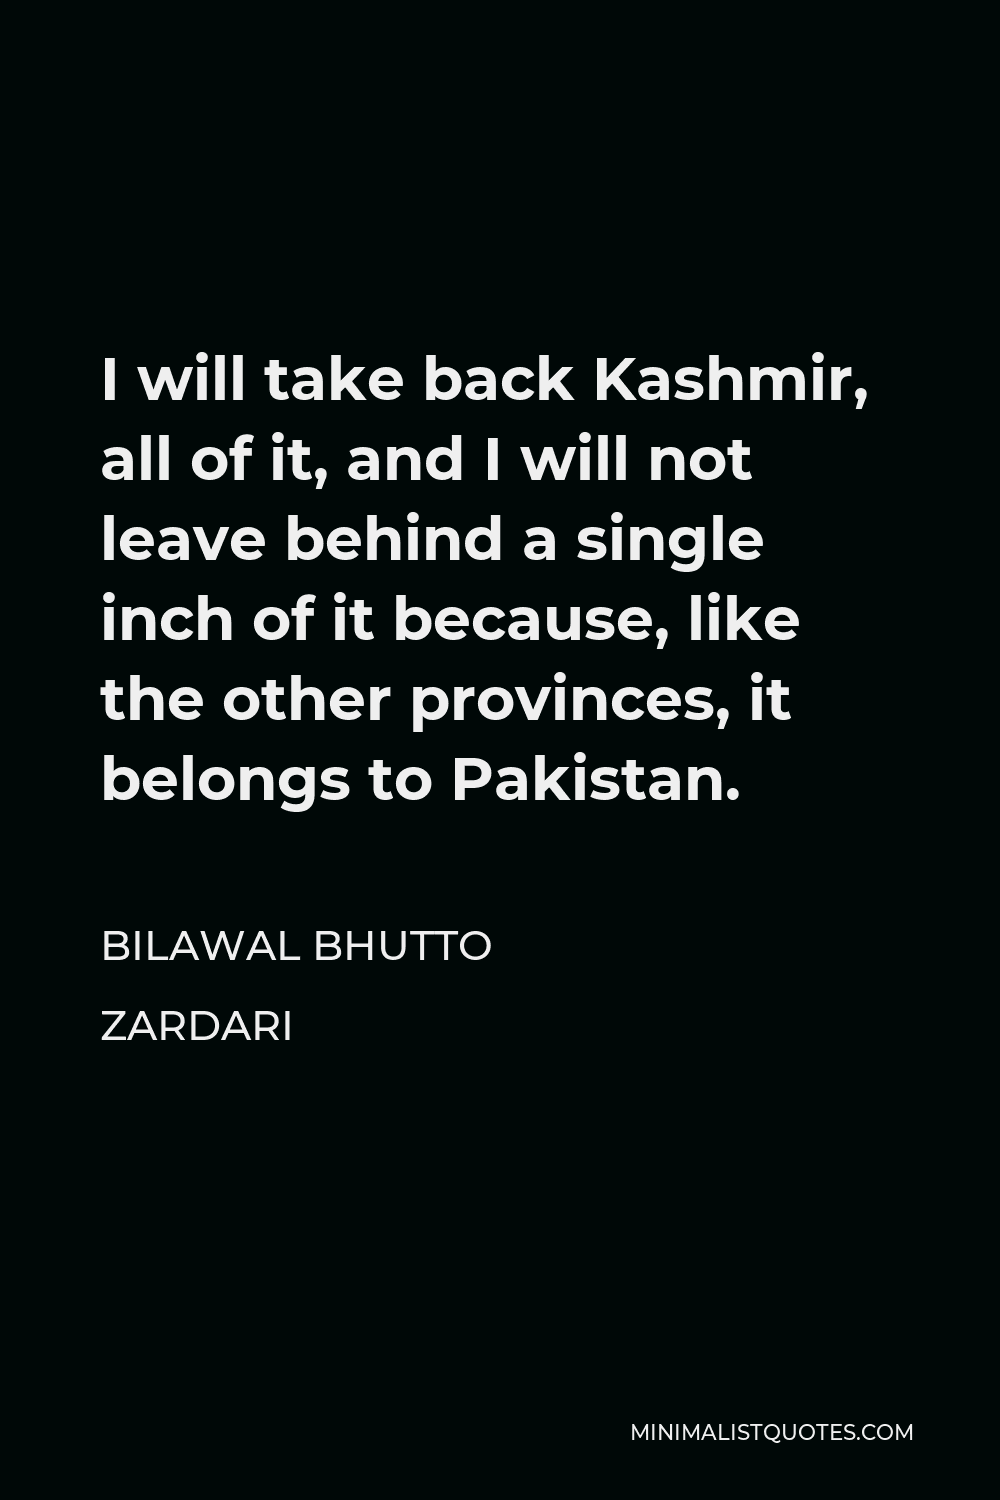 Bilawal Bhutto Zardari Quote - I will take back Kashmir, all of it, and I will not leave behind a single inch of it because, like the other provinces, it belongs to Pakistan.